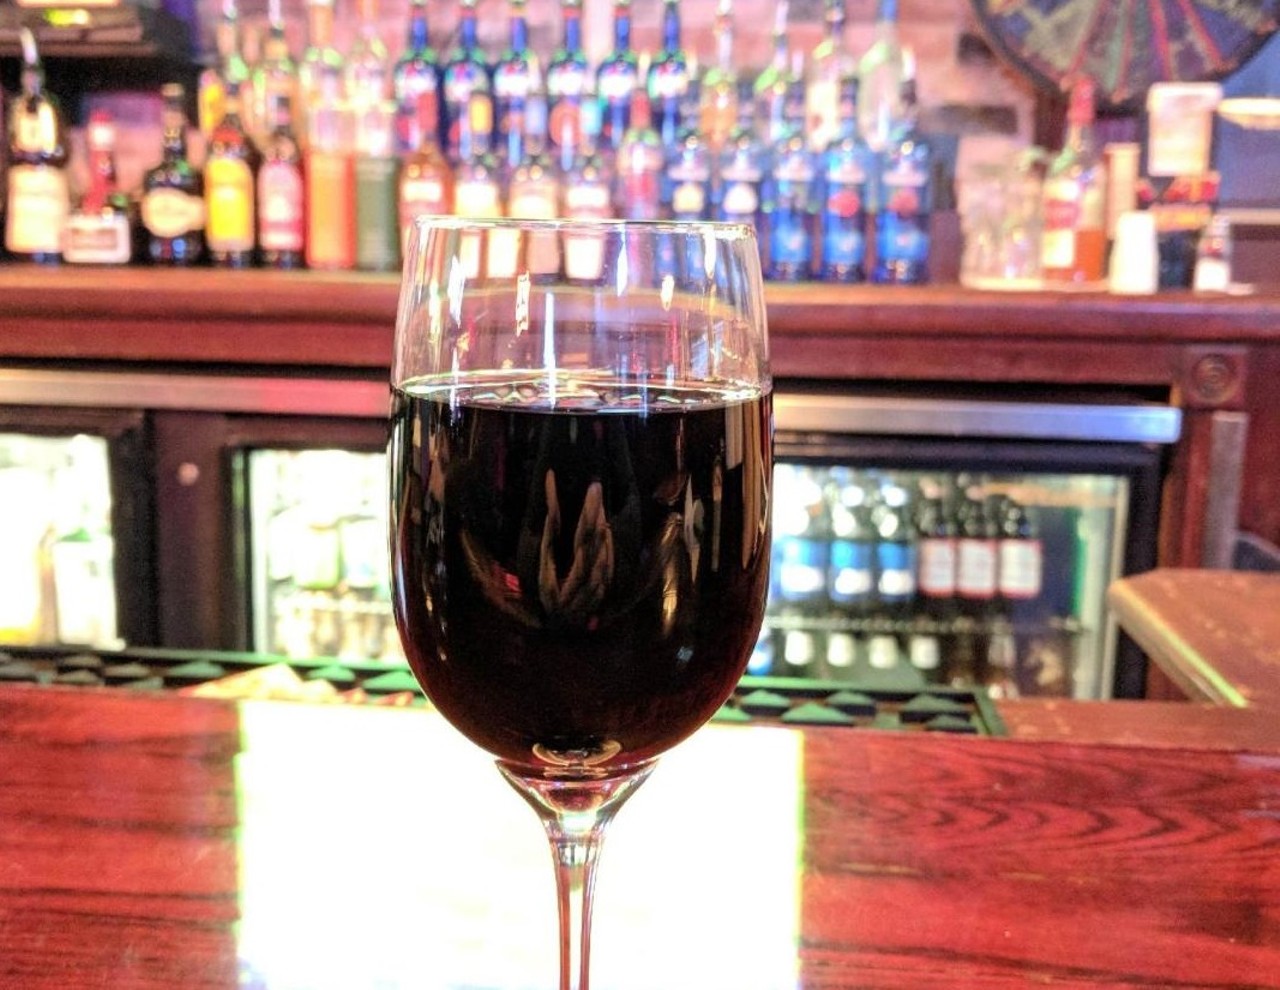 Wagon Wheel
8761 Snow Rd., Parma, 440-884-5200
It doesn&#146;t matter what time or what day, hop on the bandwagon and get a glass of wine for $4.50. Choose from Merlot, Cabernet, Riesling, Moscato, Chardonnay, Pinot Noir and Pinot Grigio.
Photo by Rachelle Poshedley<a